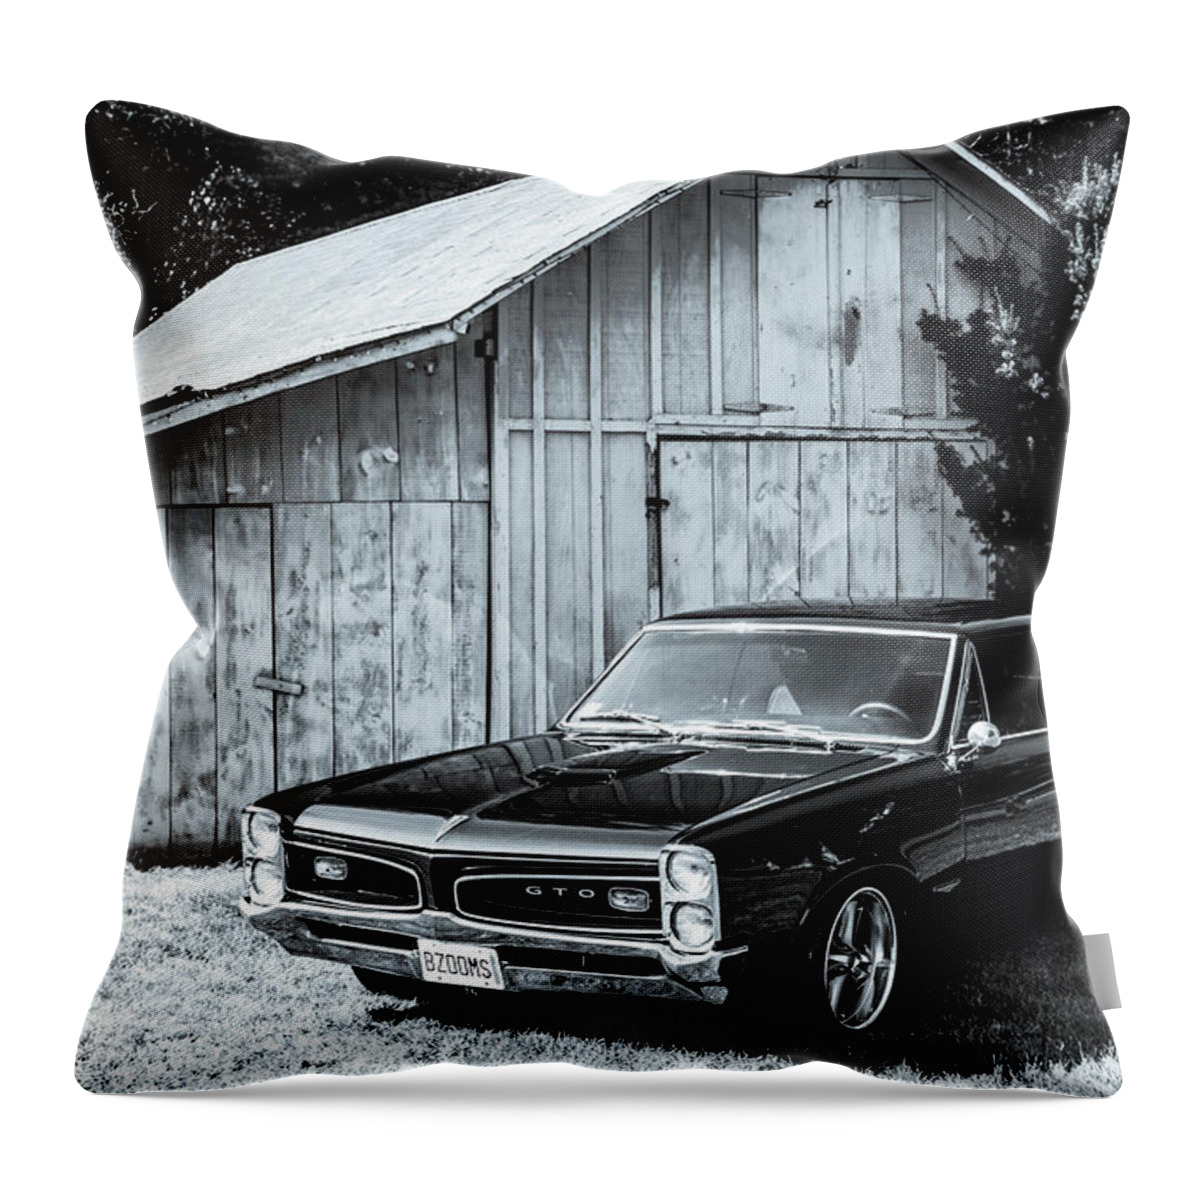 Gto Throw Pillow featuring the photograph Classic Cars #3 by Mickie Bettez